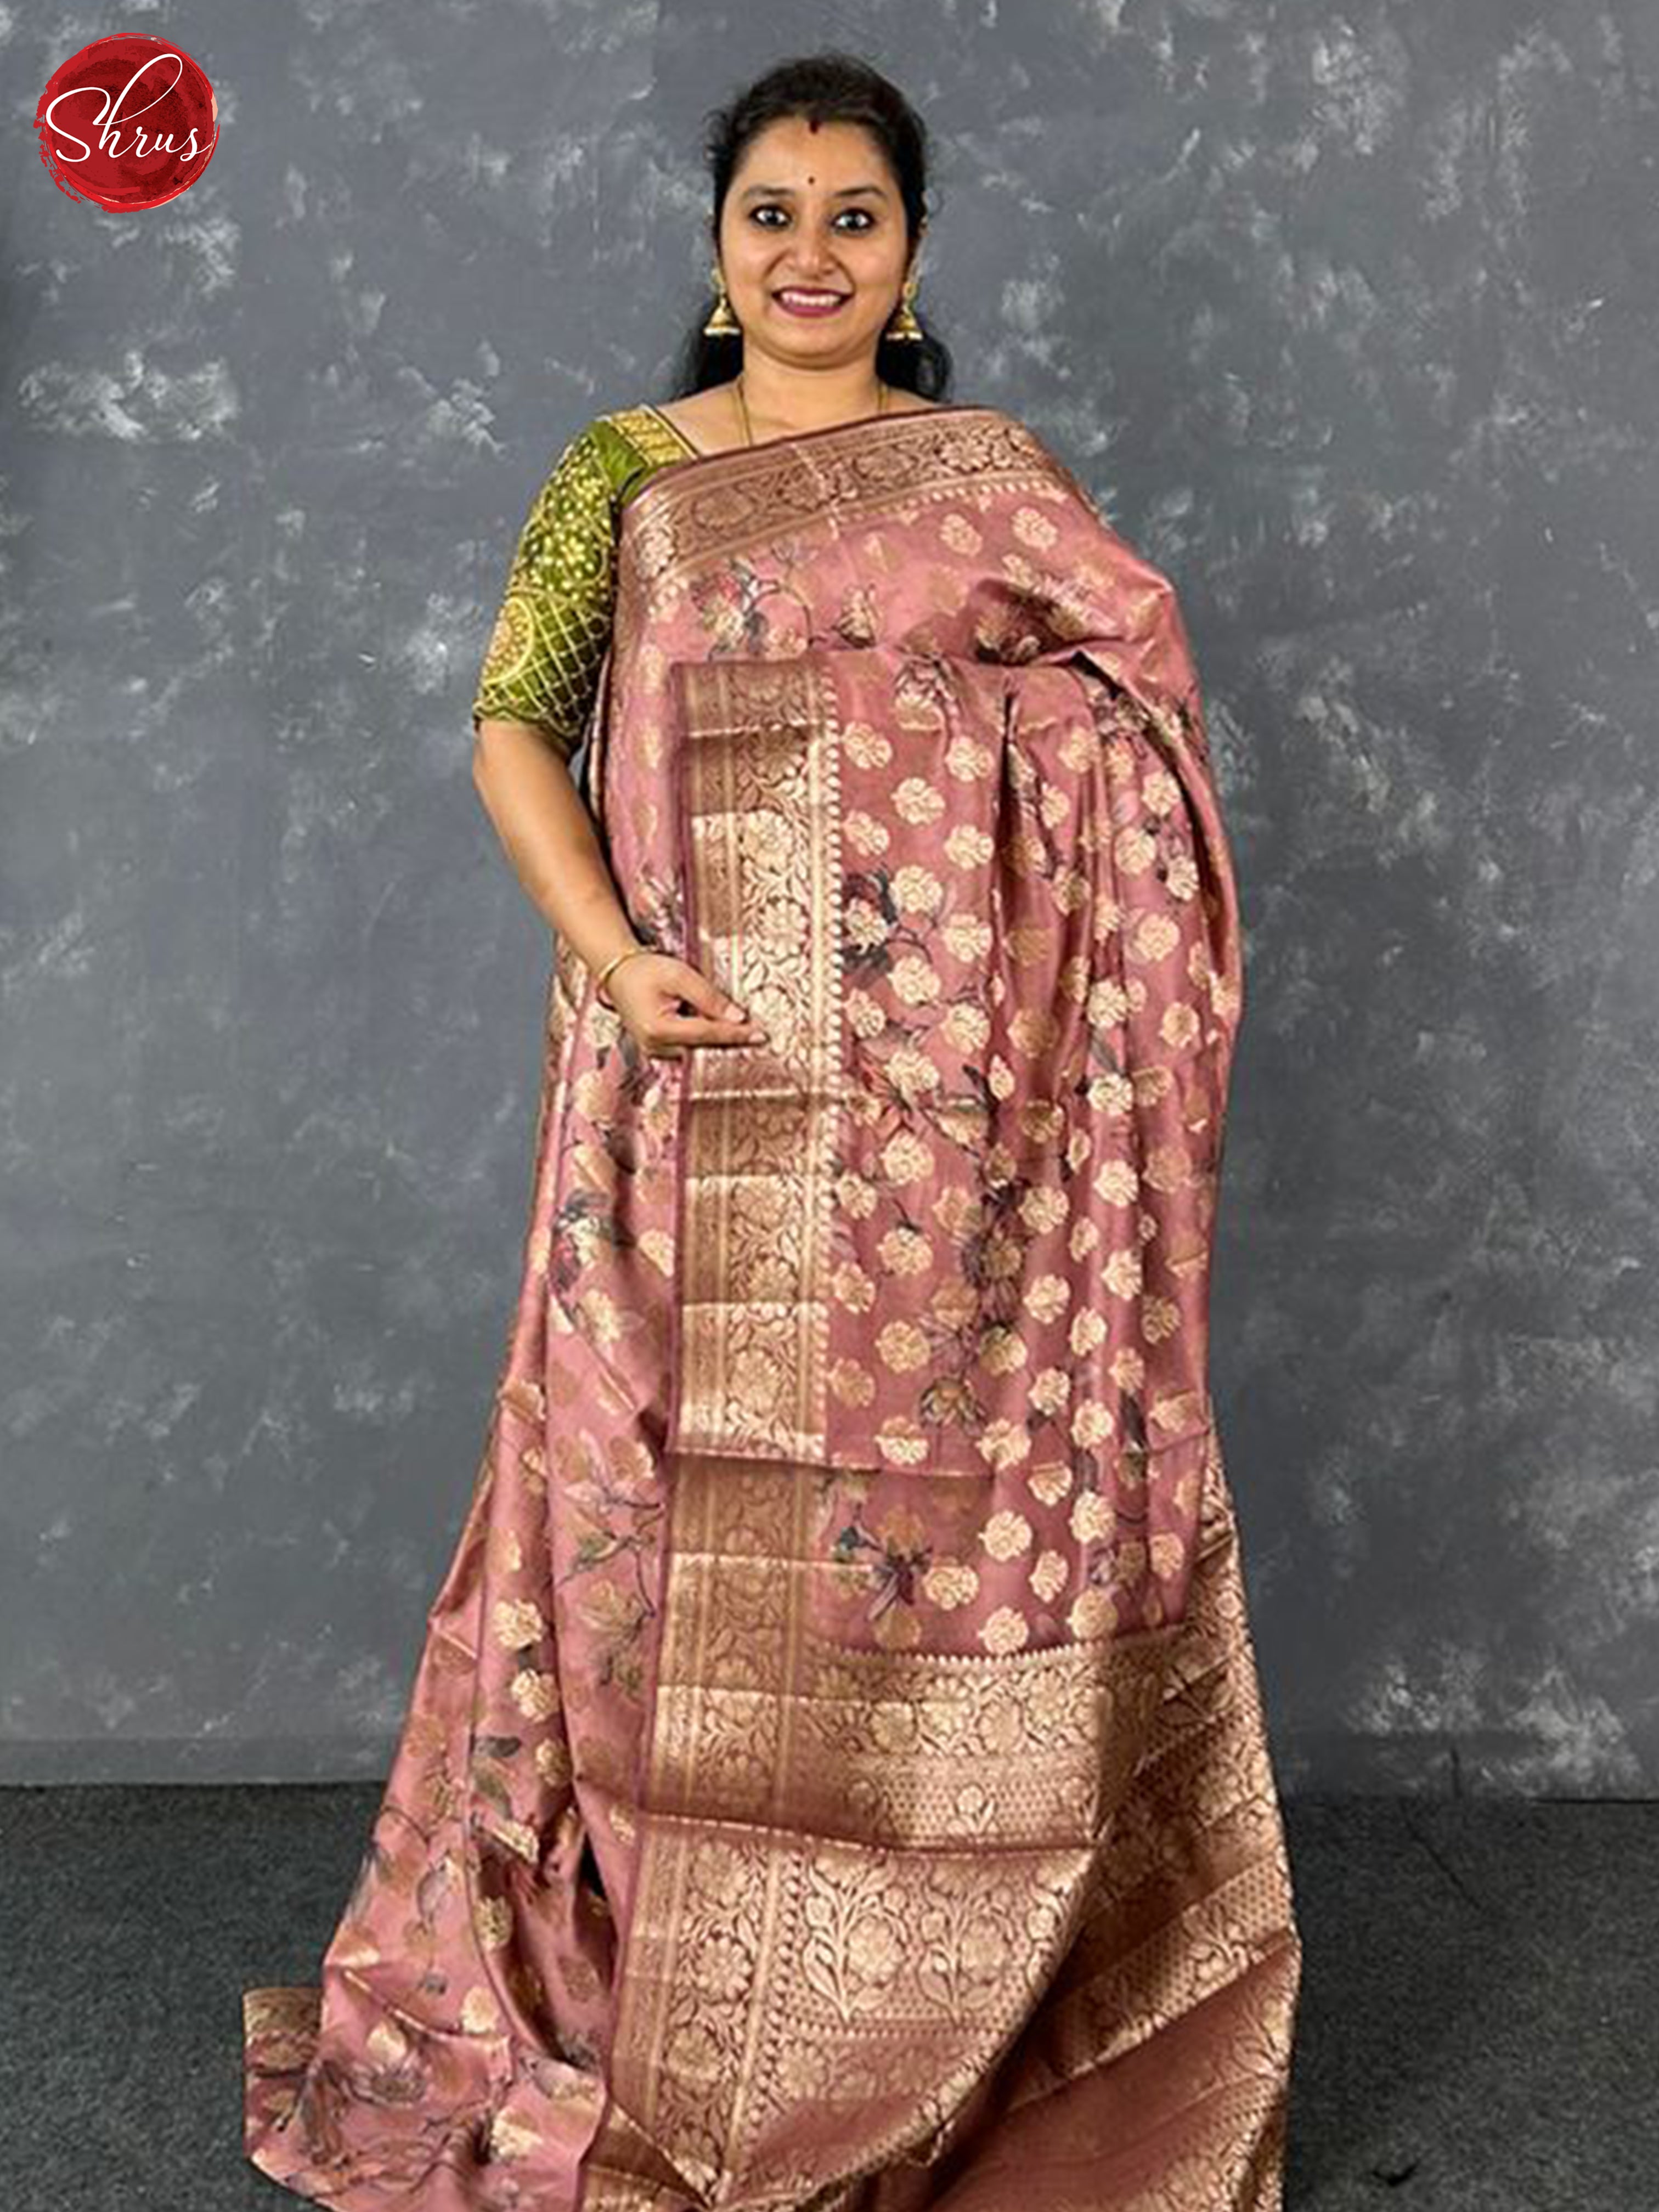 Light Brown & Brown - Tussar with zari woven floral   motifs , floral print on the body & contrast  zari border - Shop on ShrusEternity.com